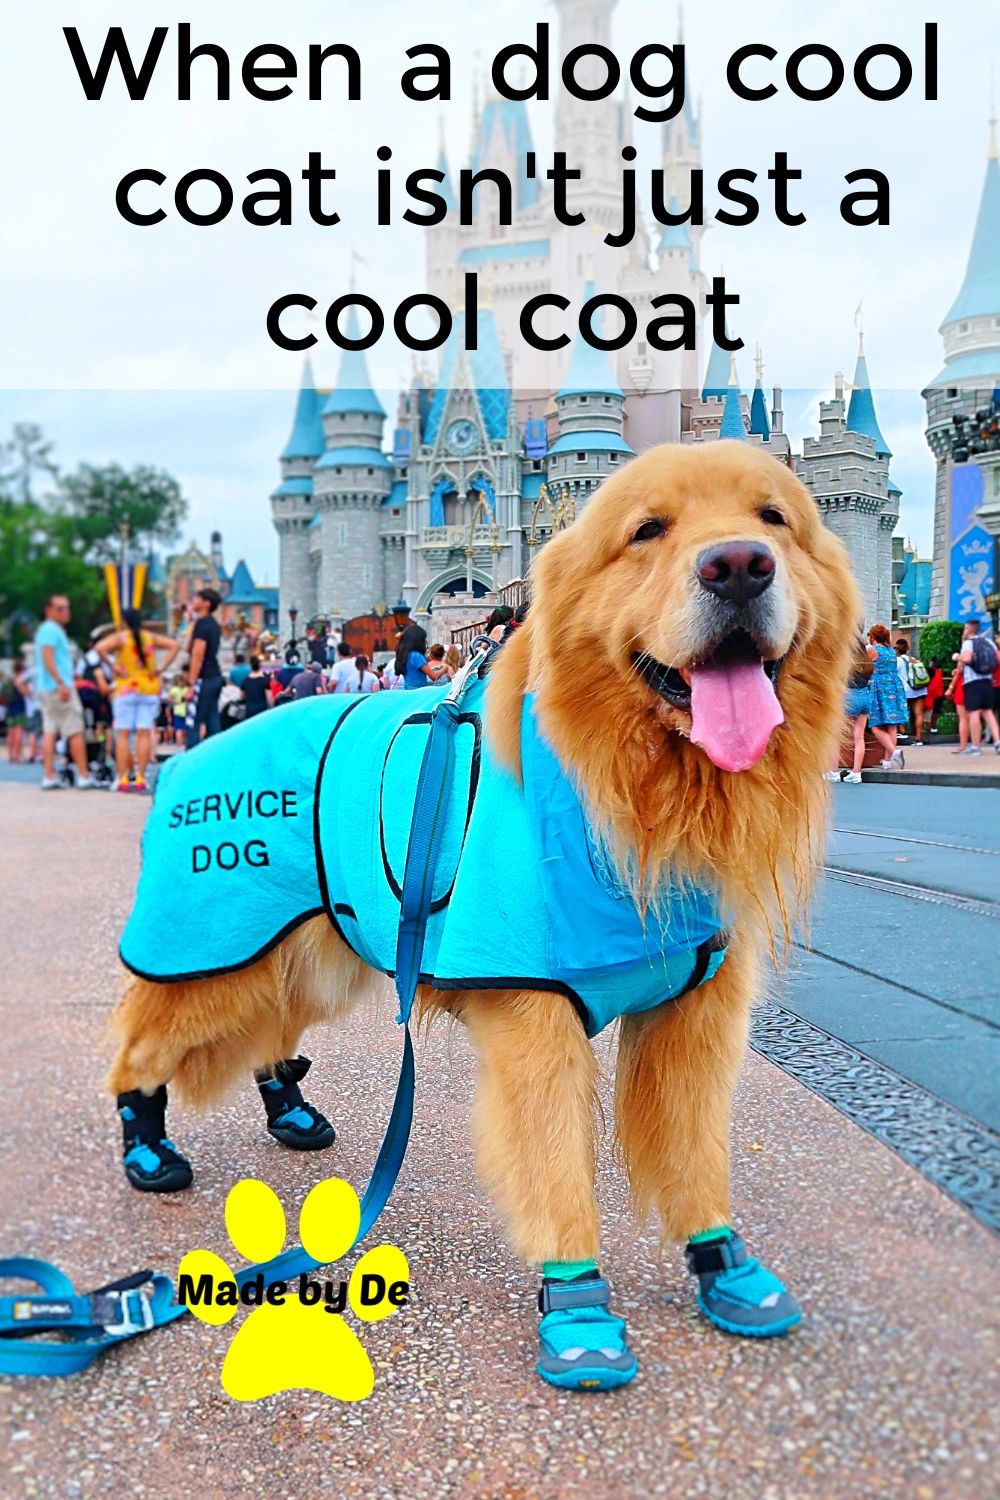 A dog cool coat isn't just a coat for cooling your dog